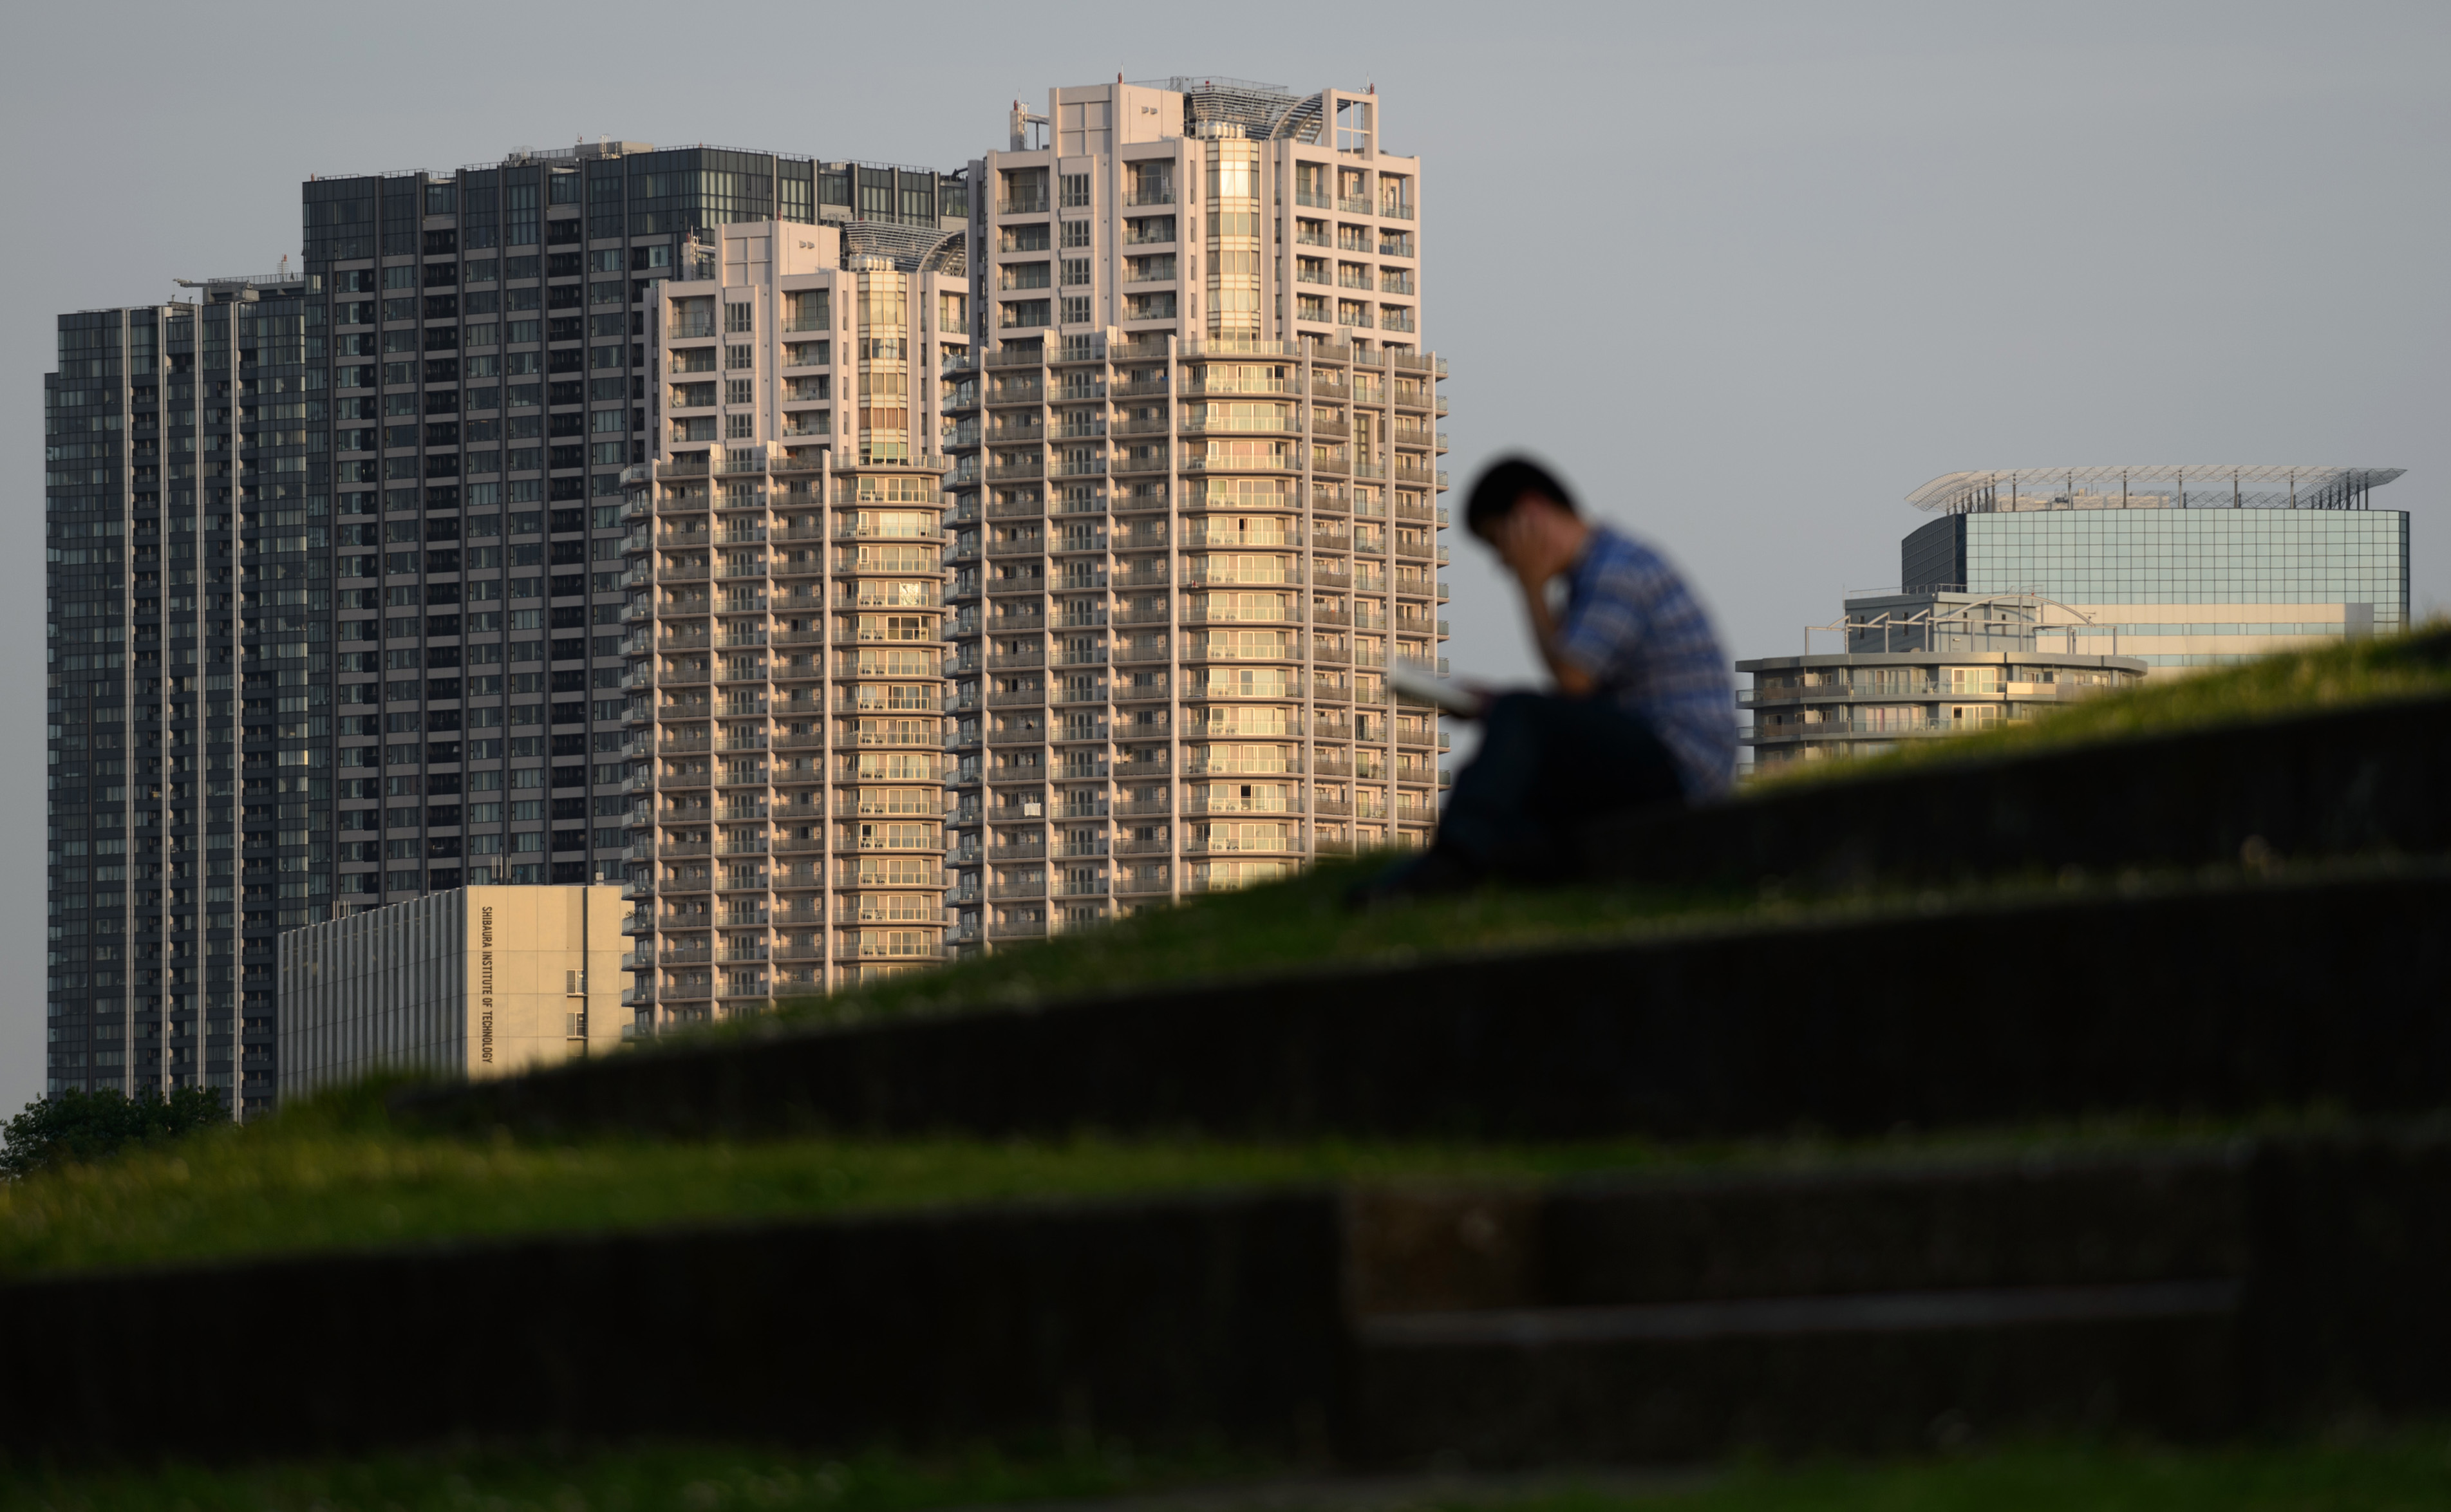 A man sits in front of residential buildings in Tokyo in June. Property prices in Tokyo are inching up as Chinese buyers flock there. | BLOOMBERG